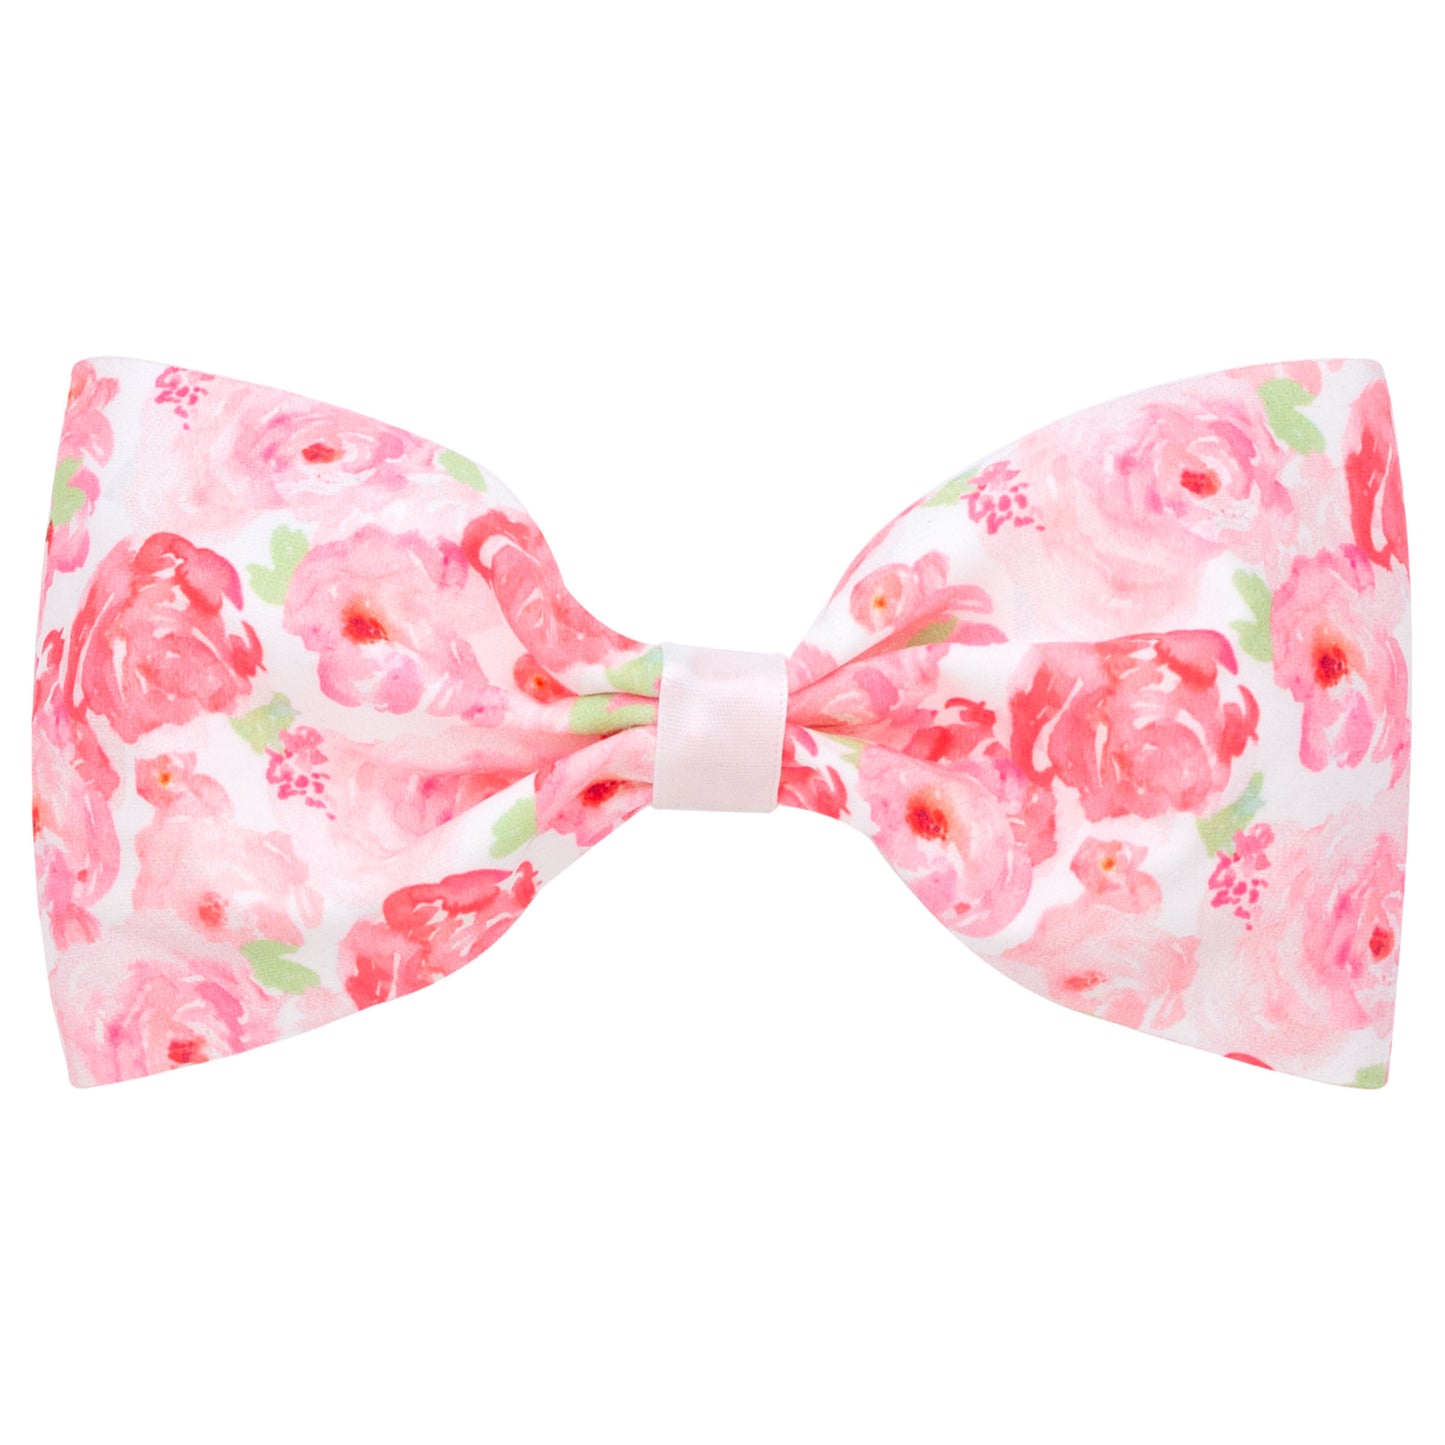 Floral Soft Nylon Add-a-Bow Baby Headband 0-6 months - Doodlebug's Children's Boutique